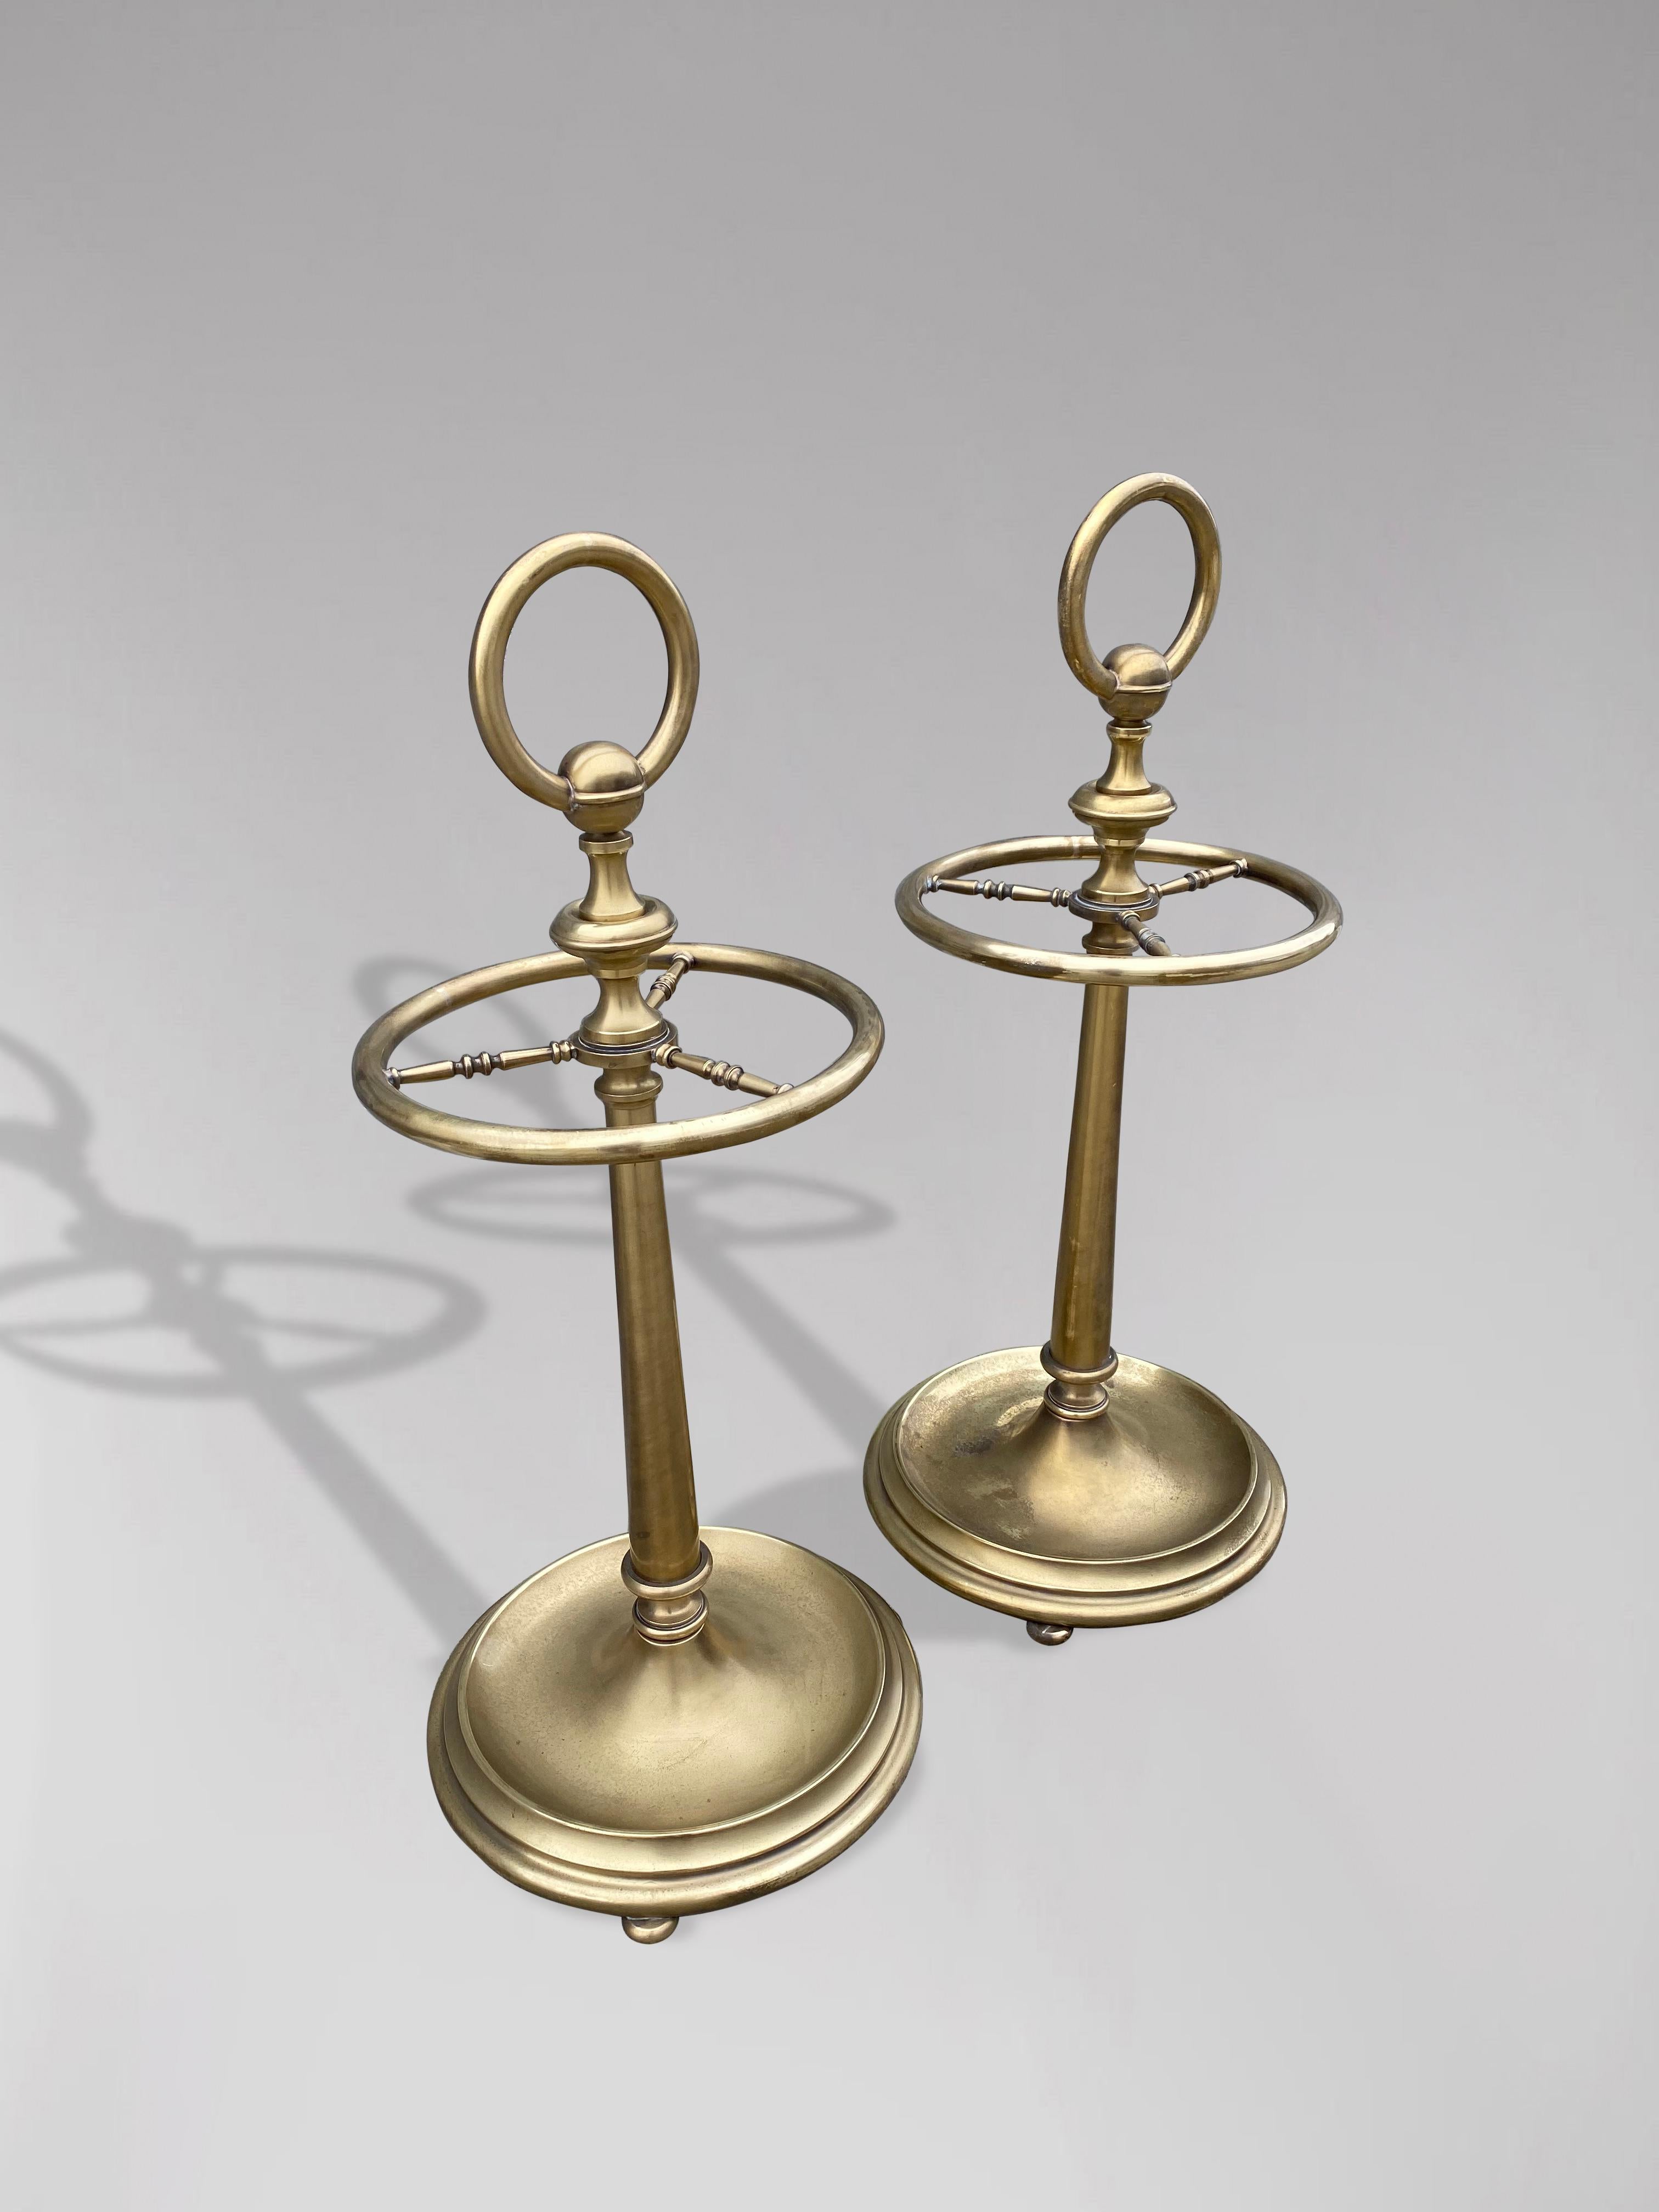 Hand-Crafted Pair of Brass Umbrella Stands